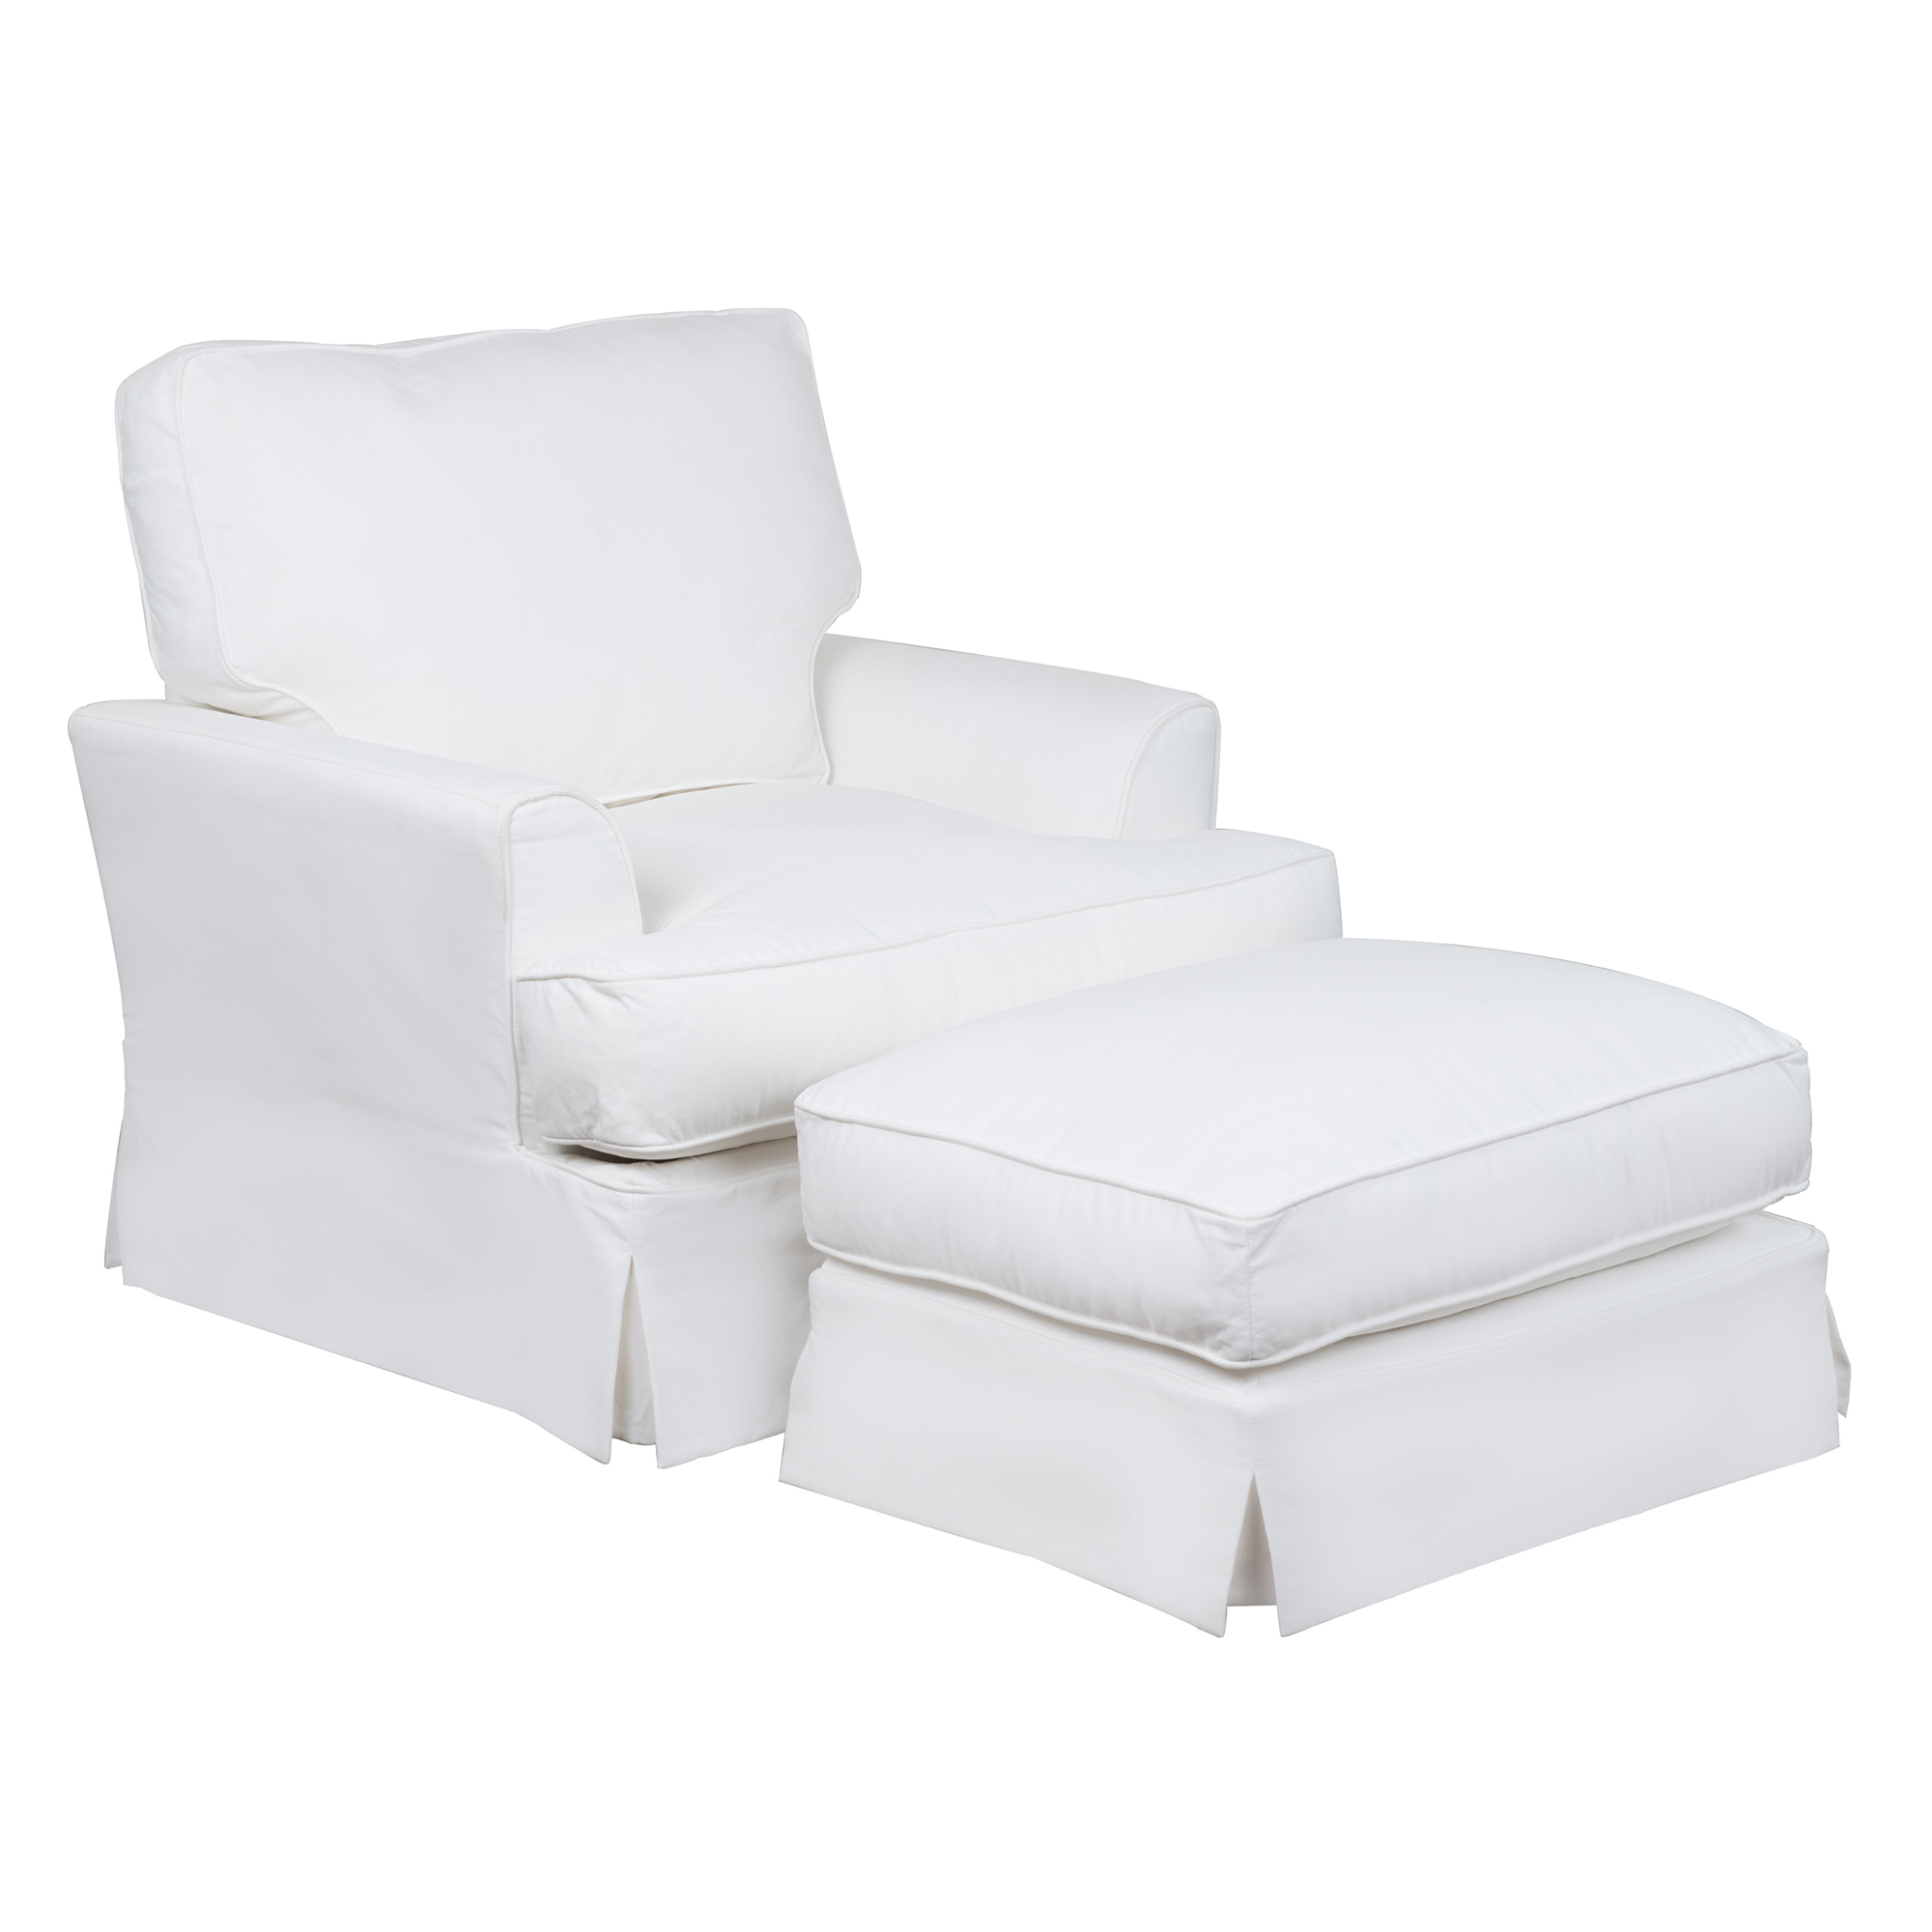 Ariana Slipcovered Chair W Ottoman Performance White Sunset Trading